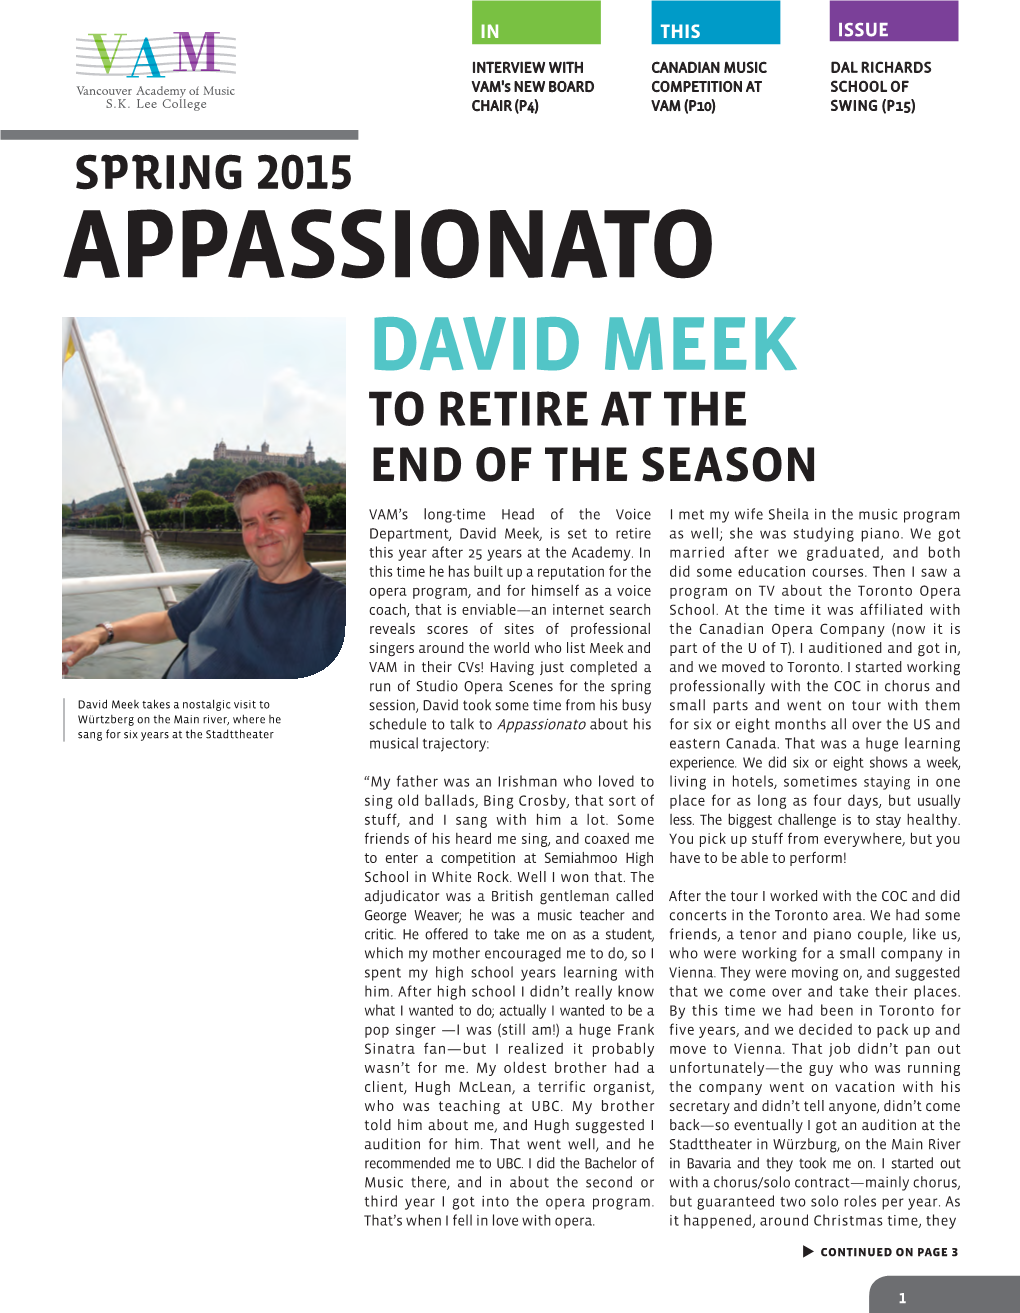 Appassionato David Meek to Retire at the End of the Season